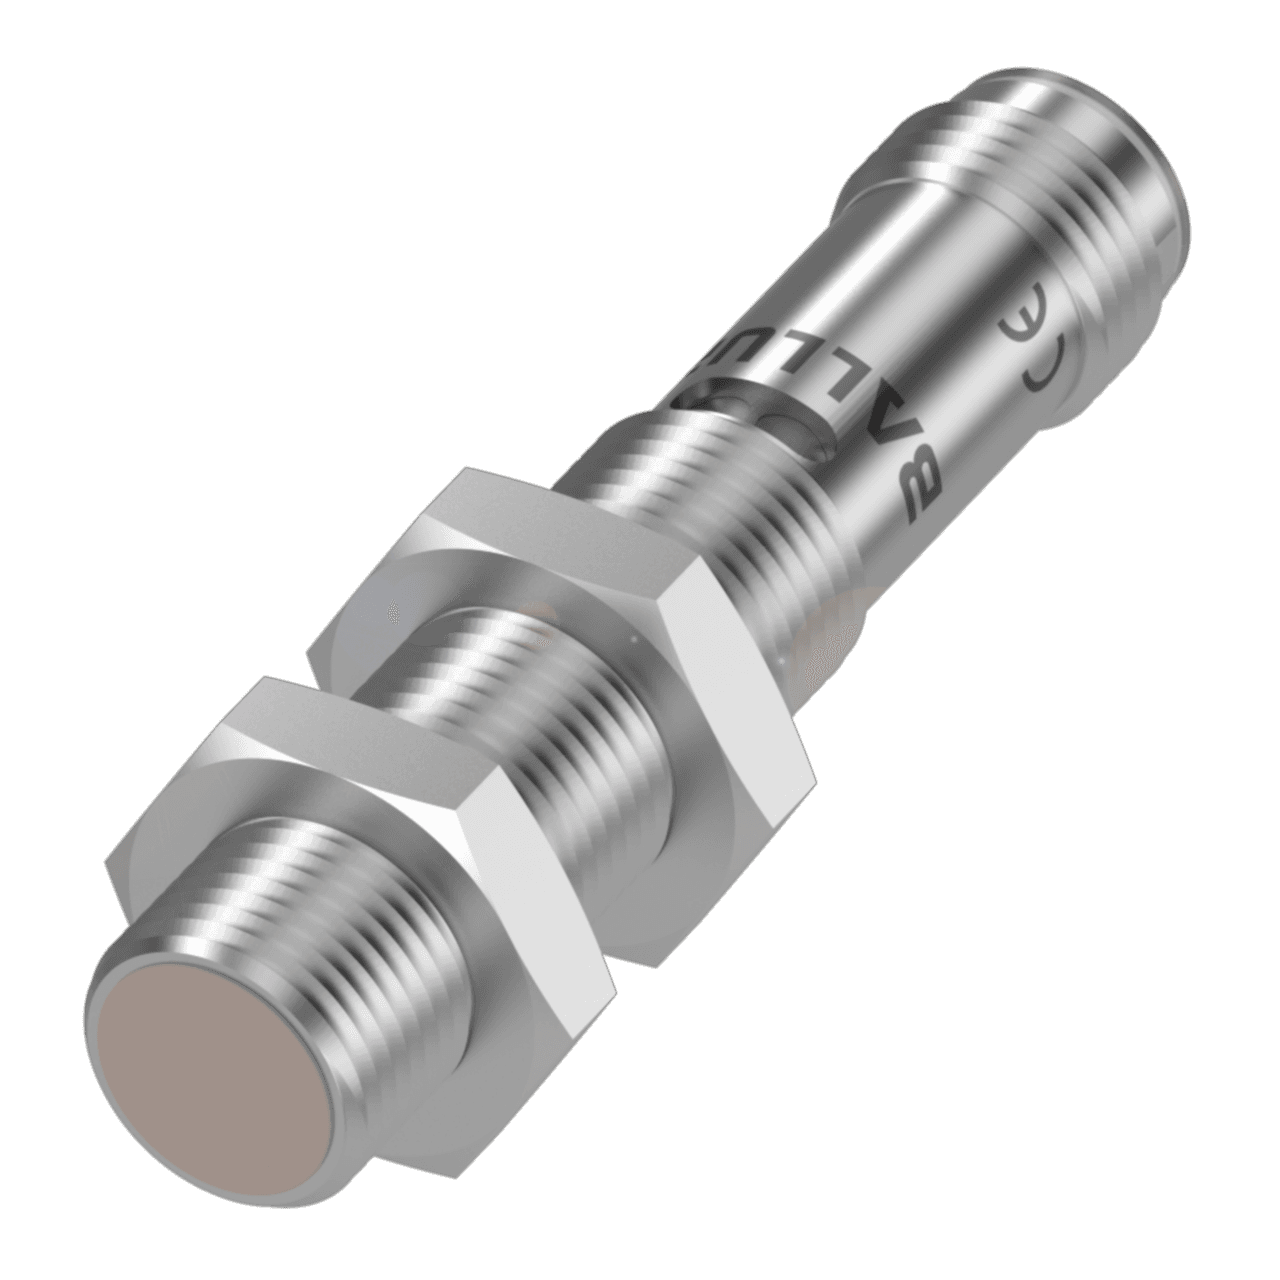 Balluff BCS017K Capacitive sensors for object detection, Dimension: Ø 12 x 60 mm, Series: M12, Thread (A): M12x1, Installation: for flush mounting, Connection: Connector, M12x1-Male, 4-pin, Switching output: Push-pull Normally open (NO), Switching frequency: 100 Hz